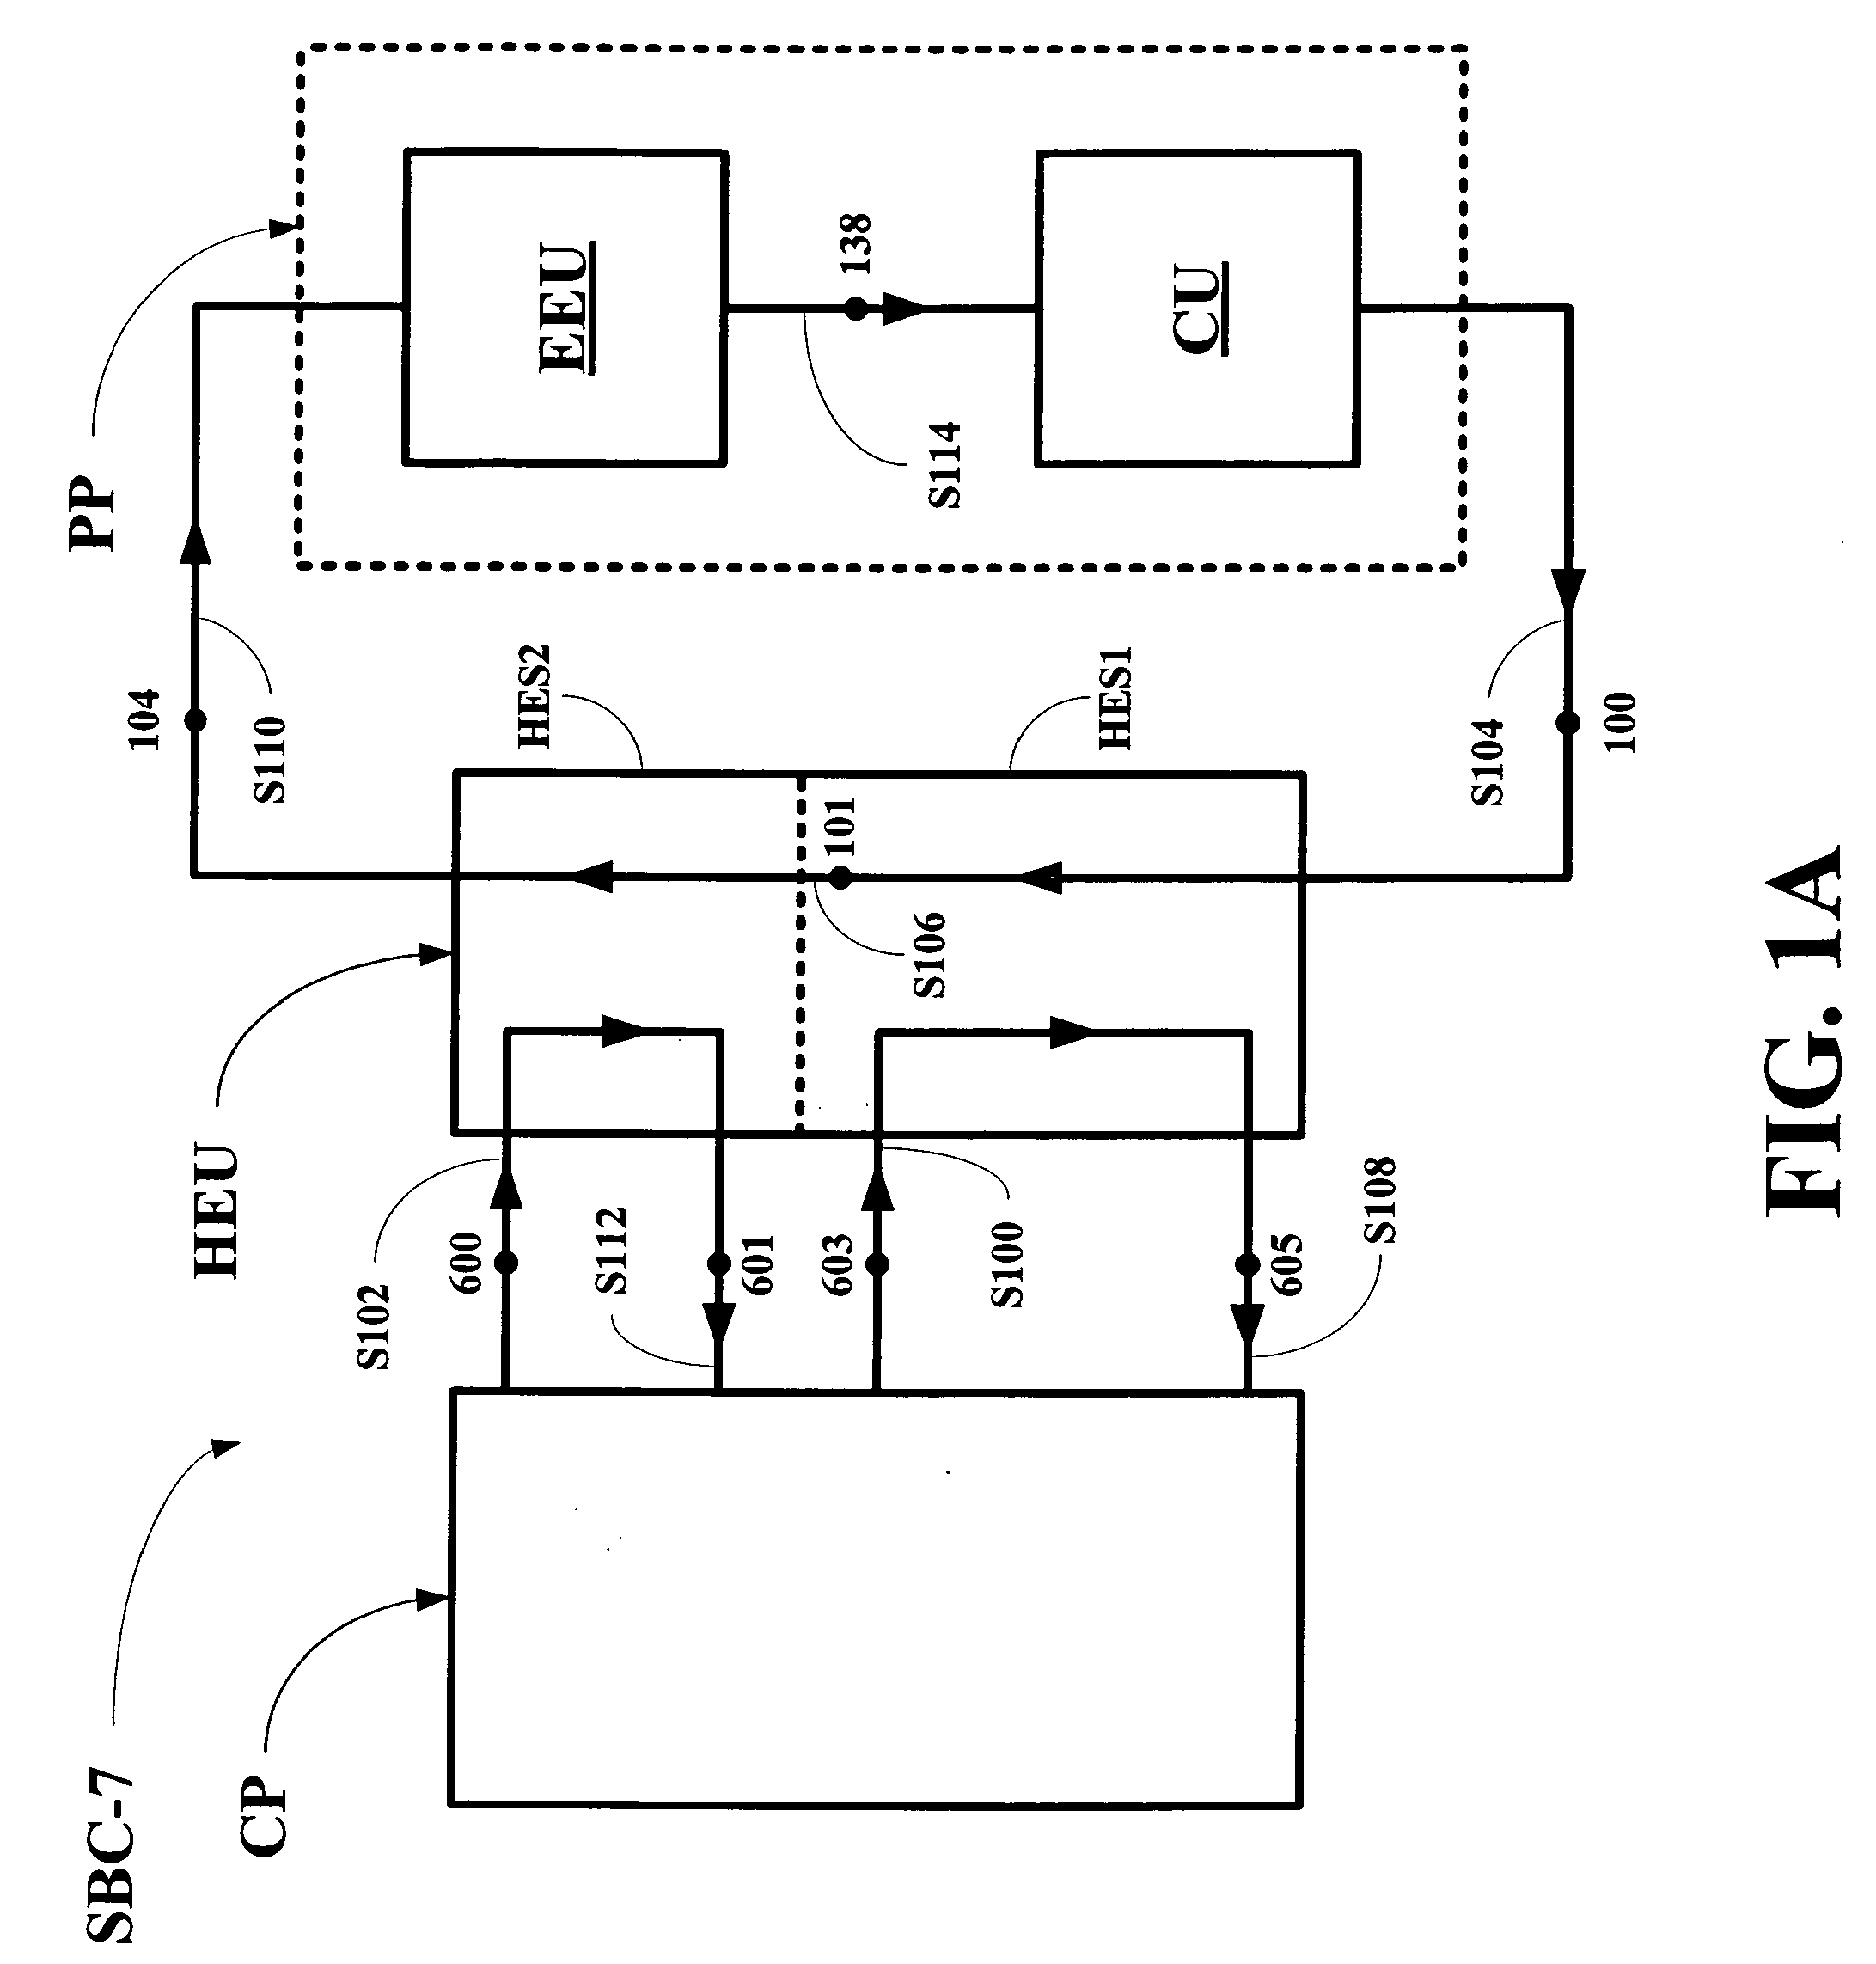 Method and system for converting waste heat from cement plant into a usable form of energy